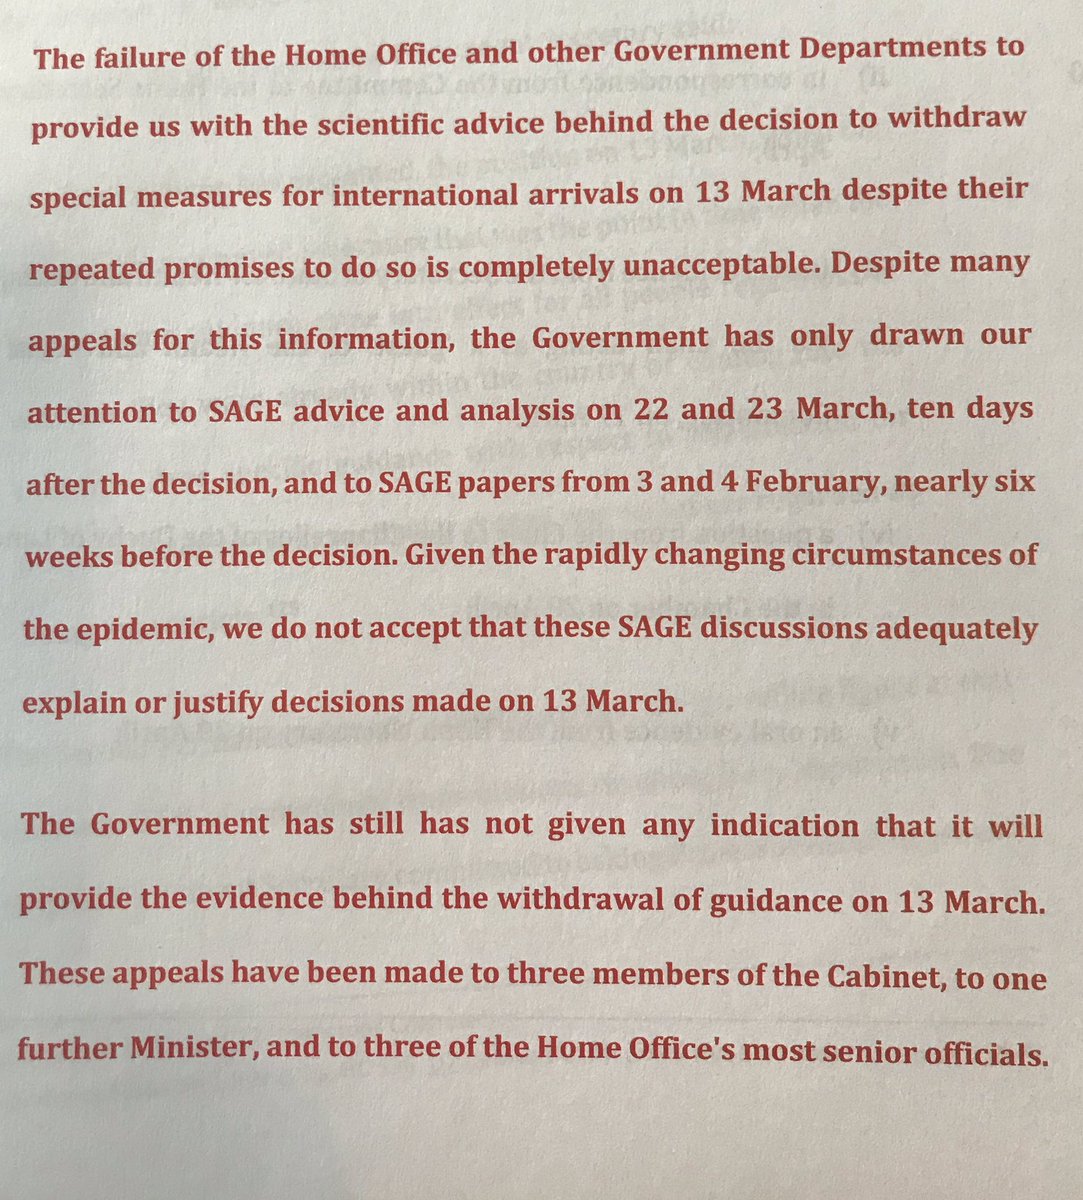 5/ Govt has said it was following the science. But we have been unable to find any scientific basis or advice behind those mid March decisions - esp to lift all self isolation measures on 13 March - despite repeated requests. If the science exists, Govt must publish it.